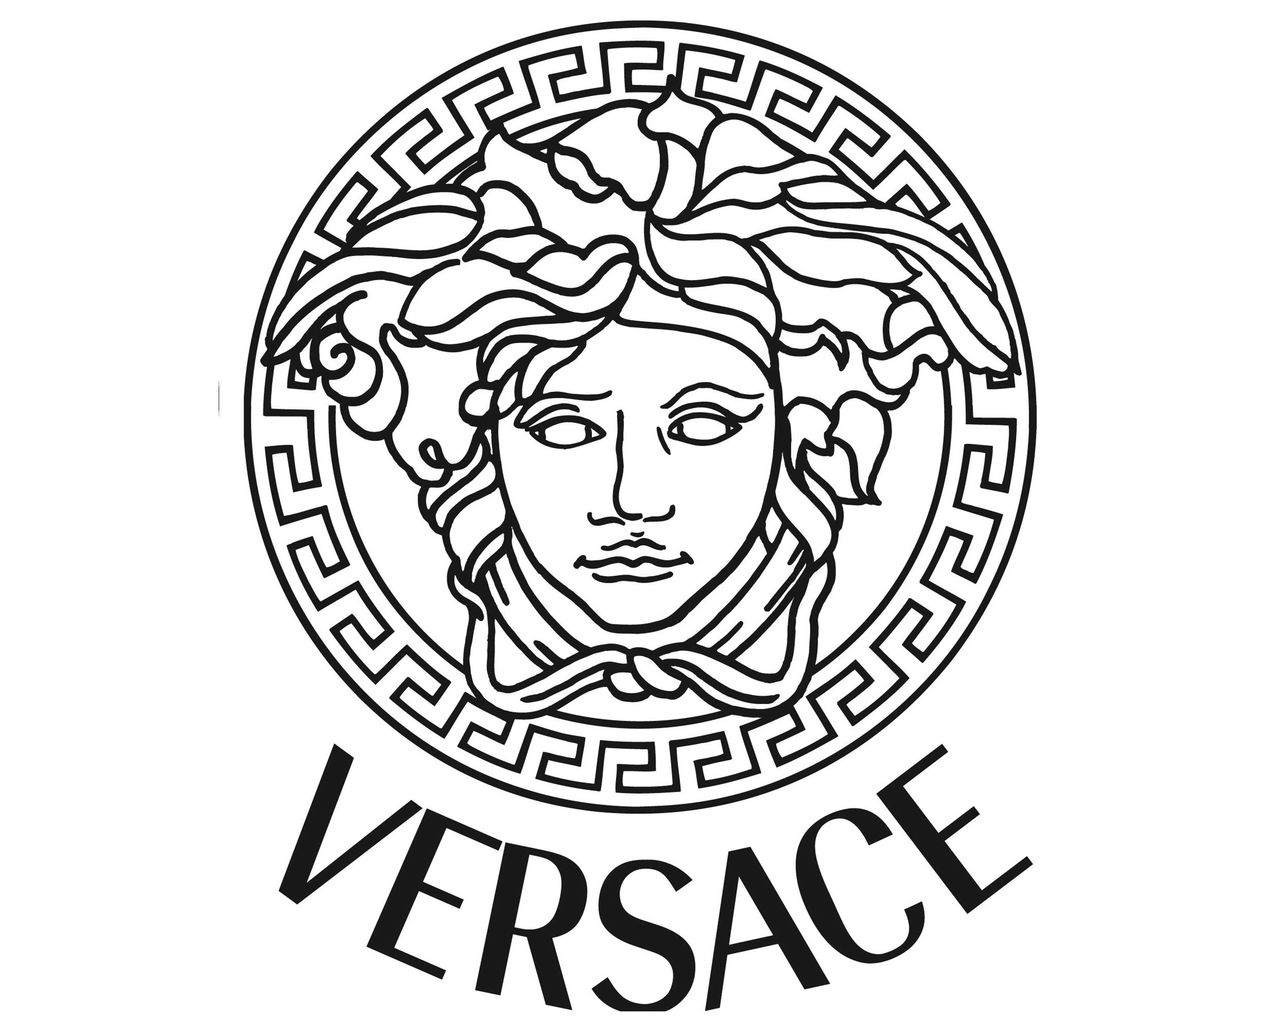 10 facts you didn't know about Versace